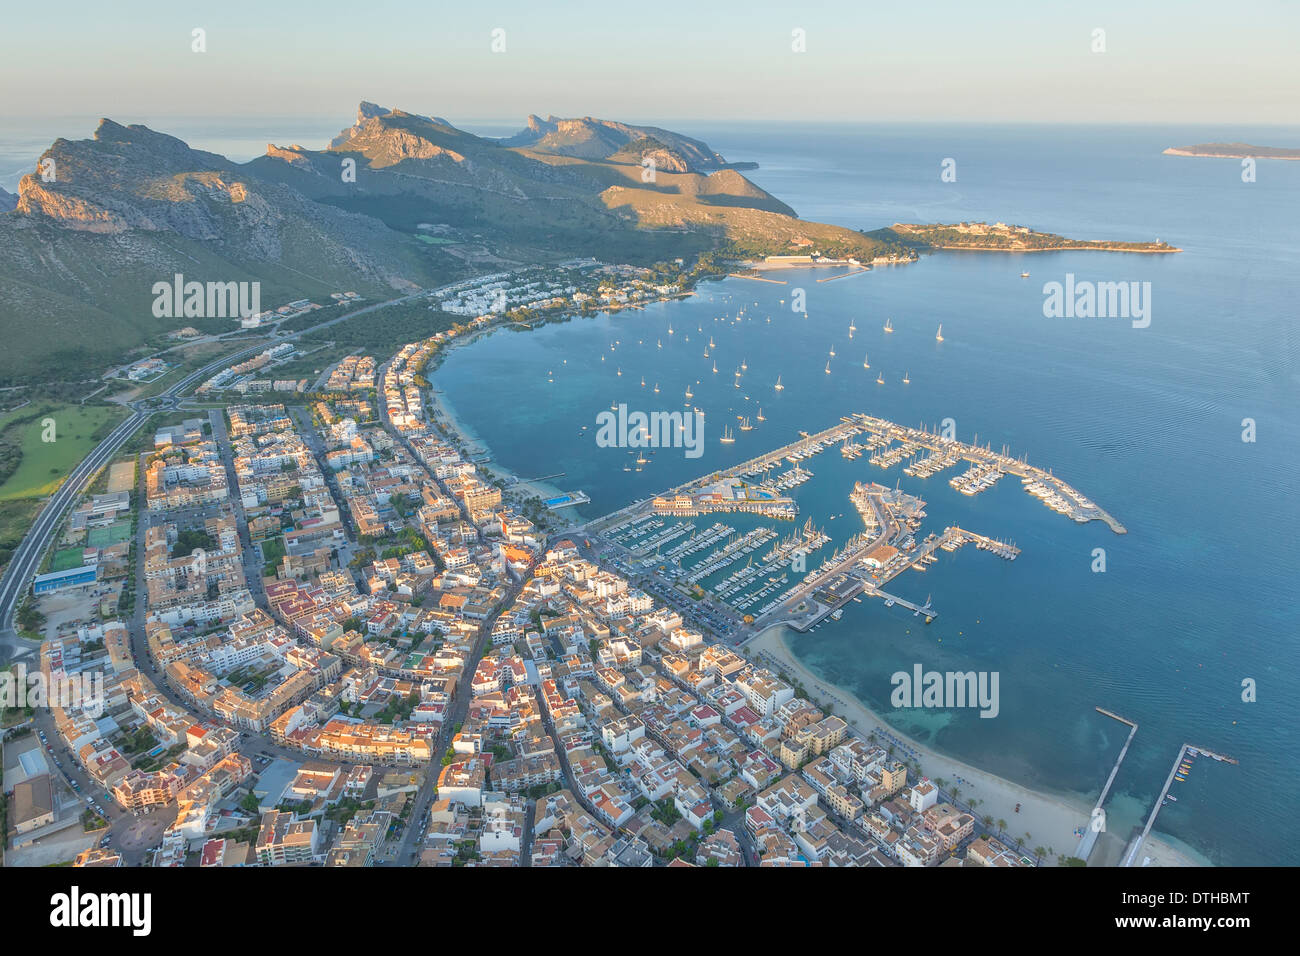 Northern area of Majorca. Port de Pollensa resort and Formentor peninsula at sunset. Aerial view. Balearic islands, Spain Stock Photo